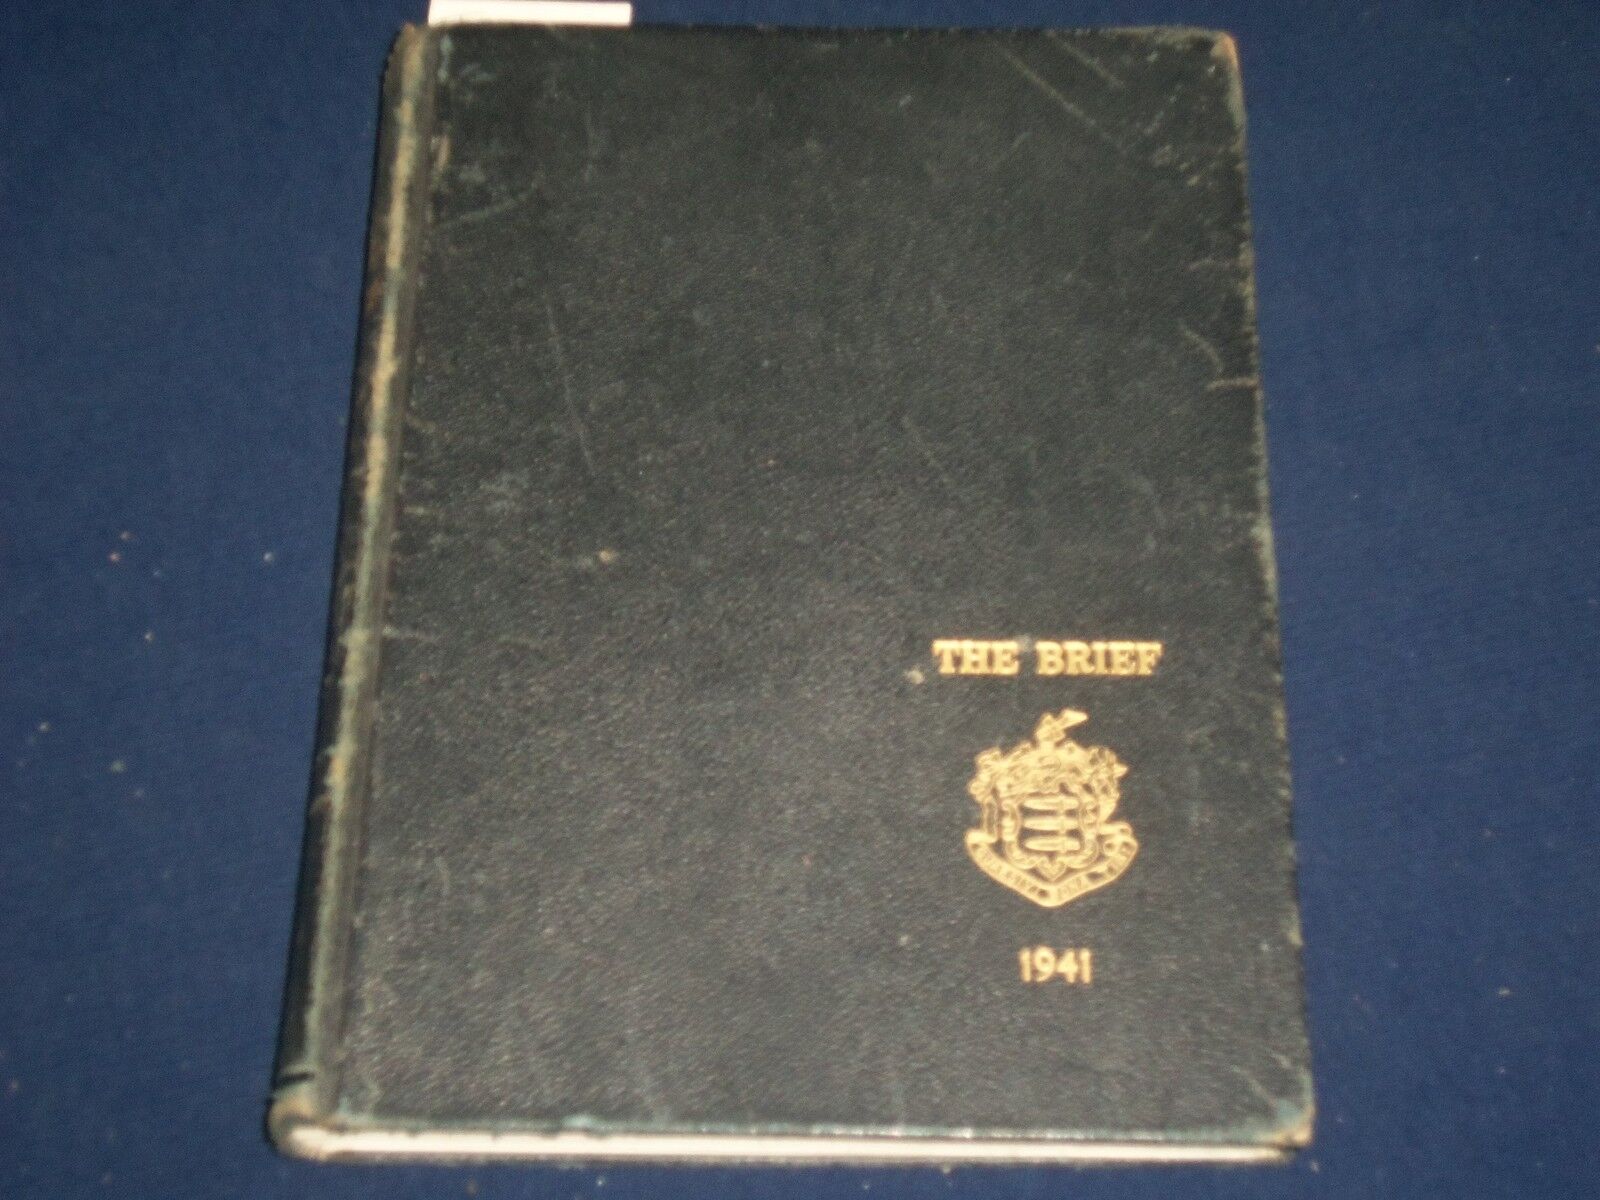 1941 THE BRIEF CHOATE SCHOOL YEARBOOK WALLINGFORD CT. - JAMES WHITMORE - YB 370